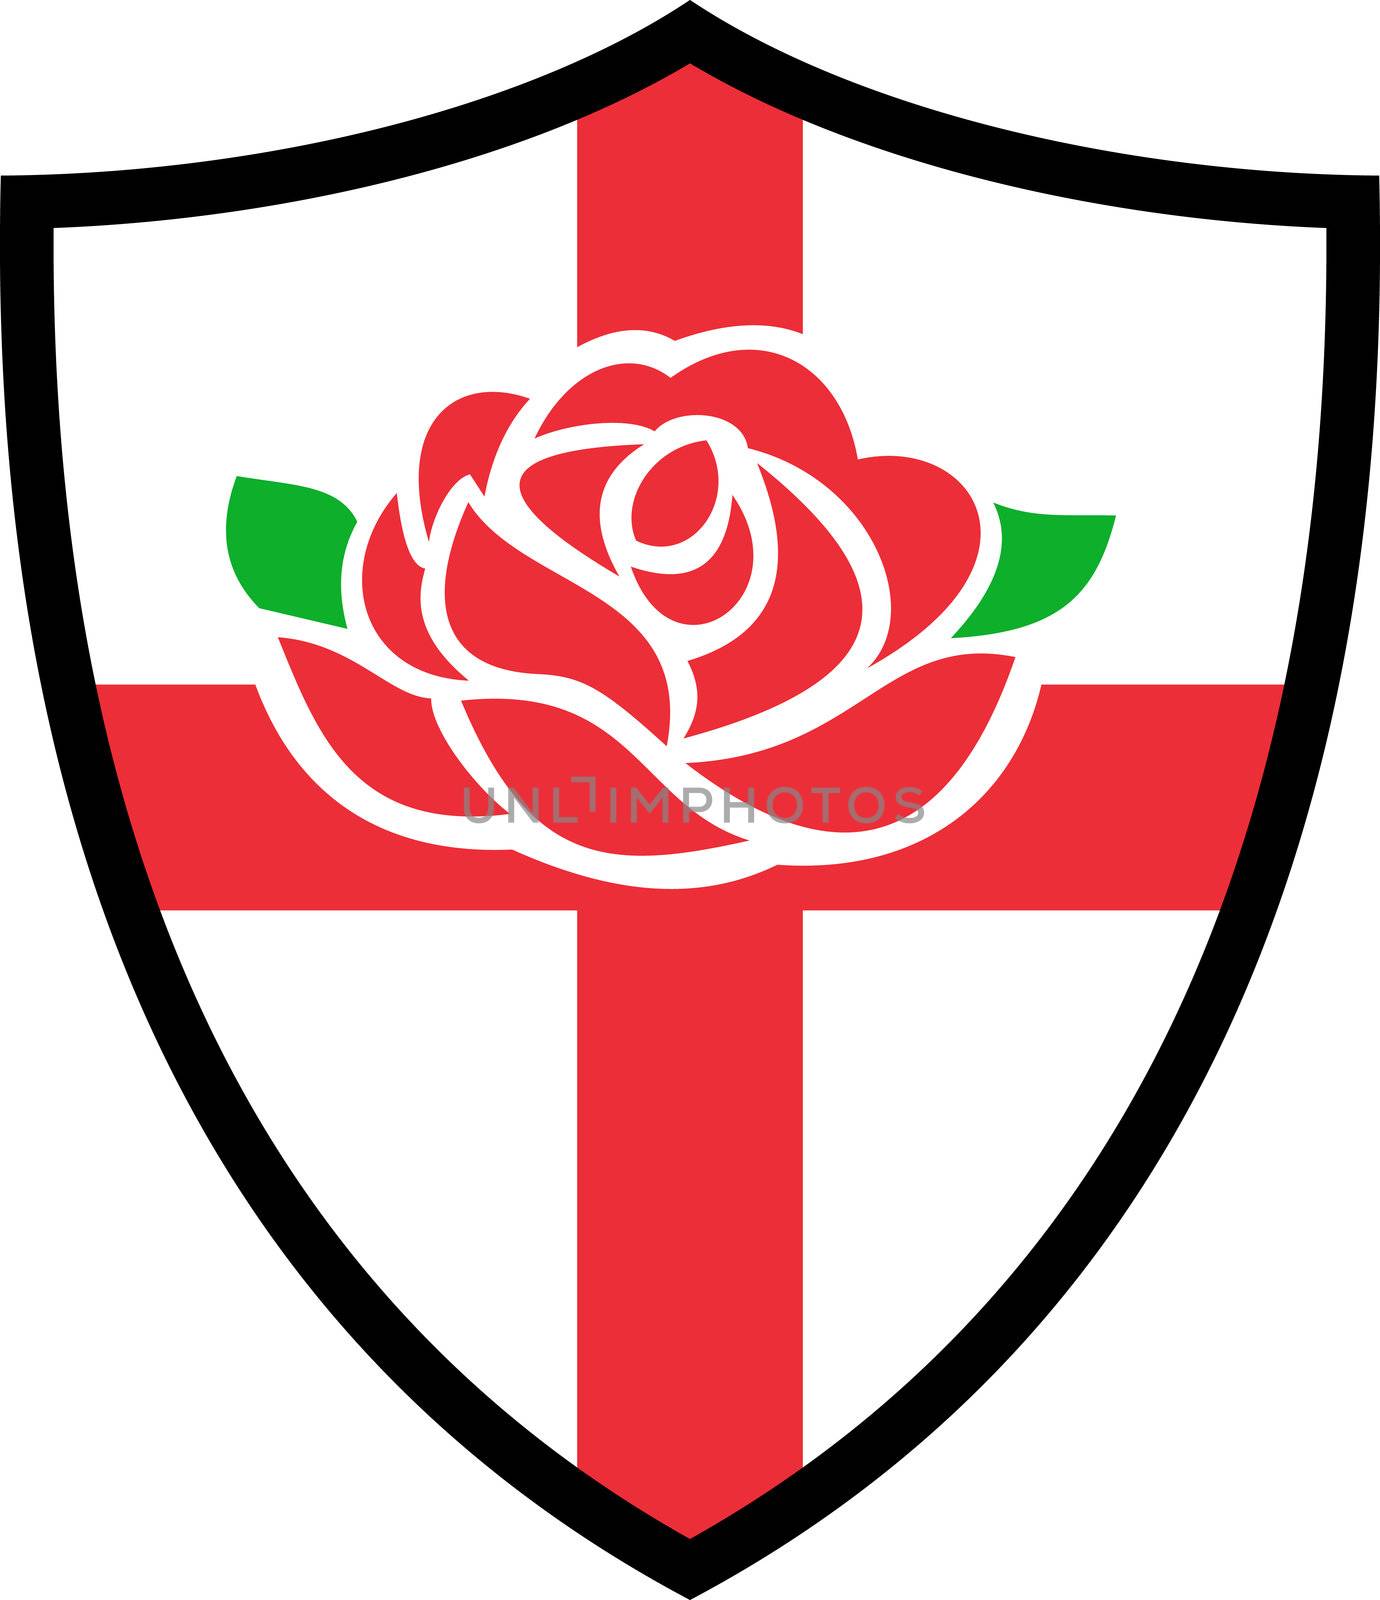 Illustration of a red English rose with flag of England inside shield